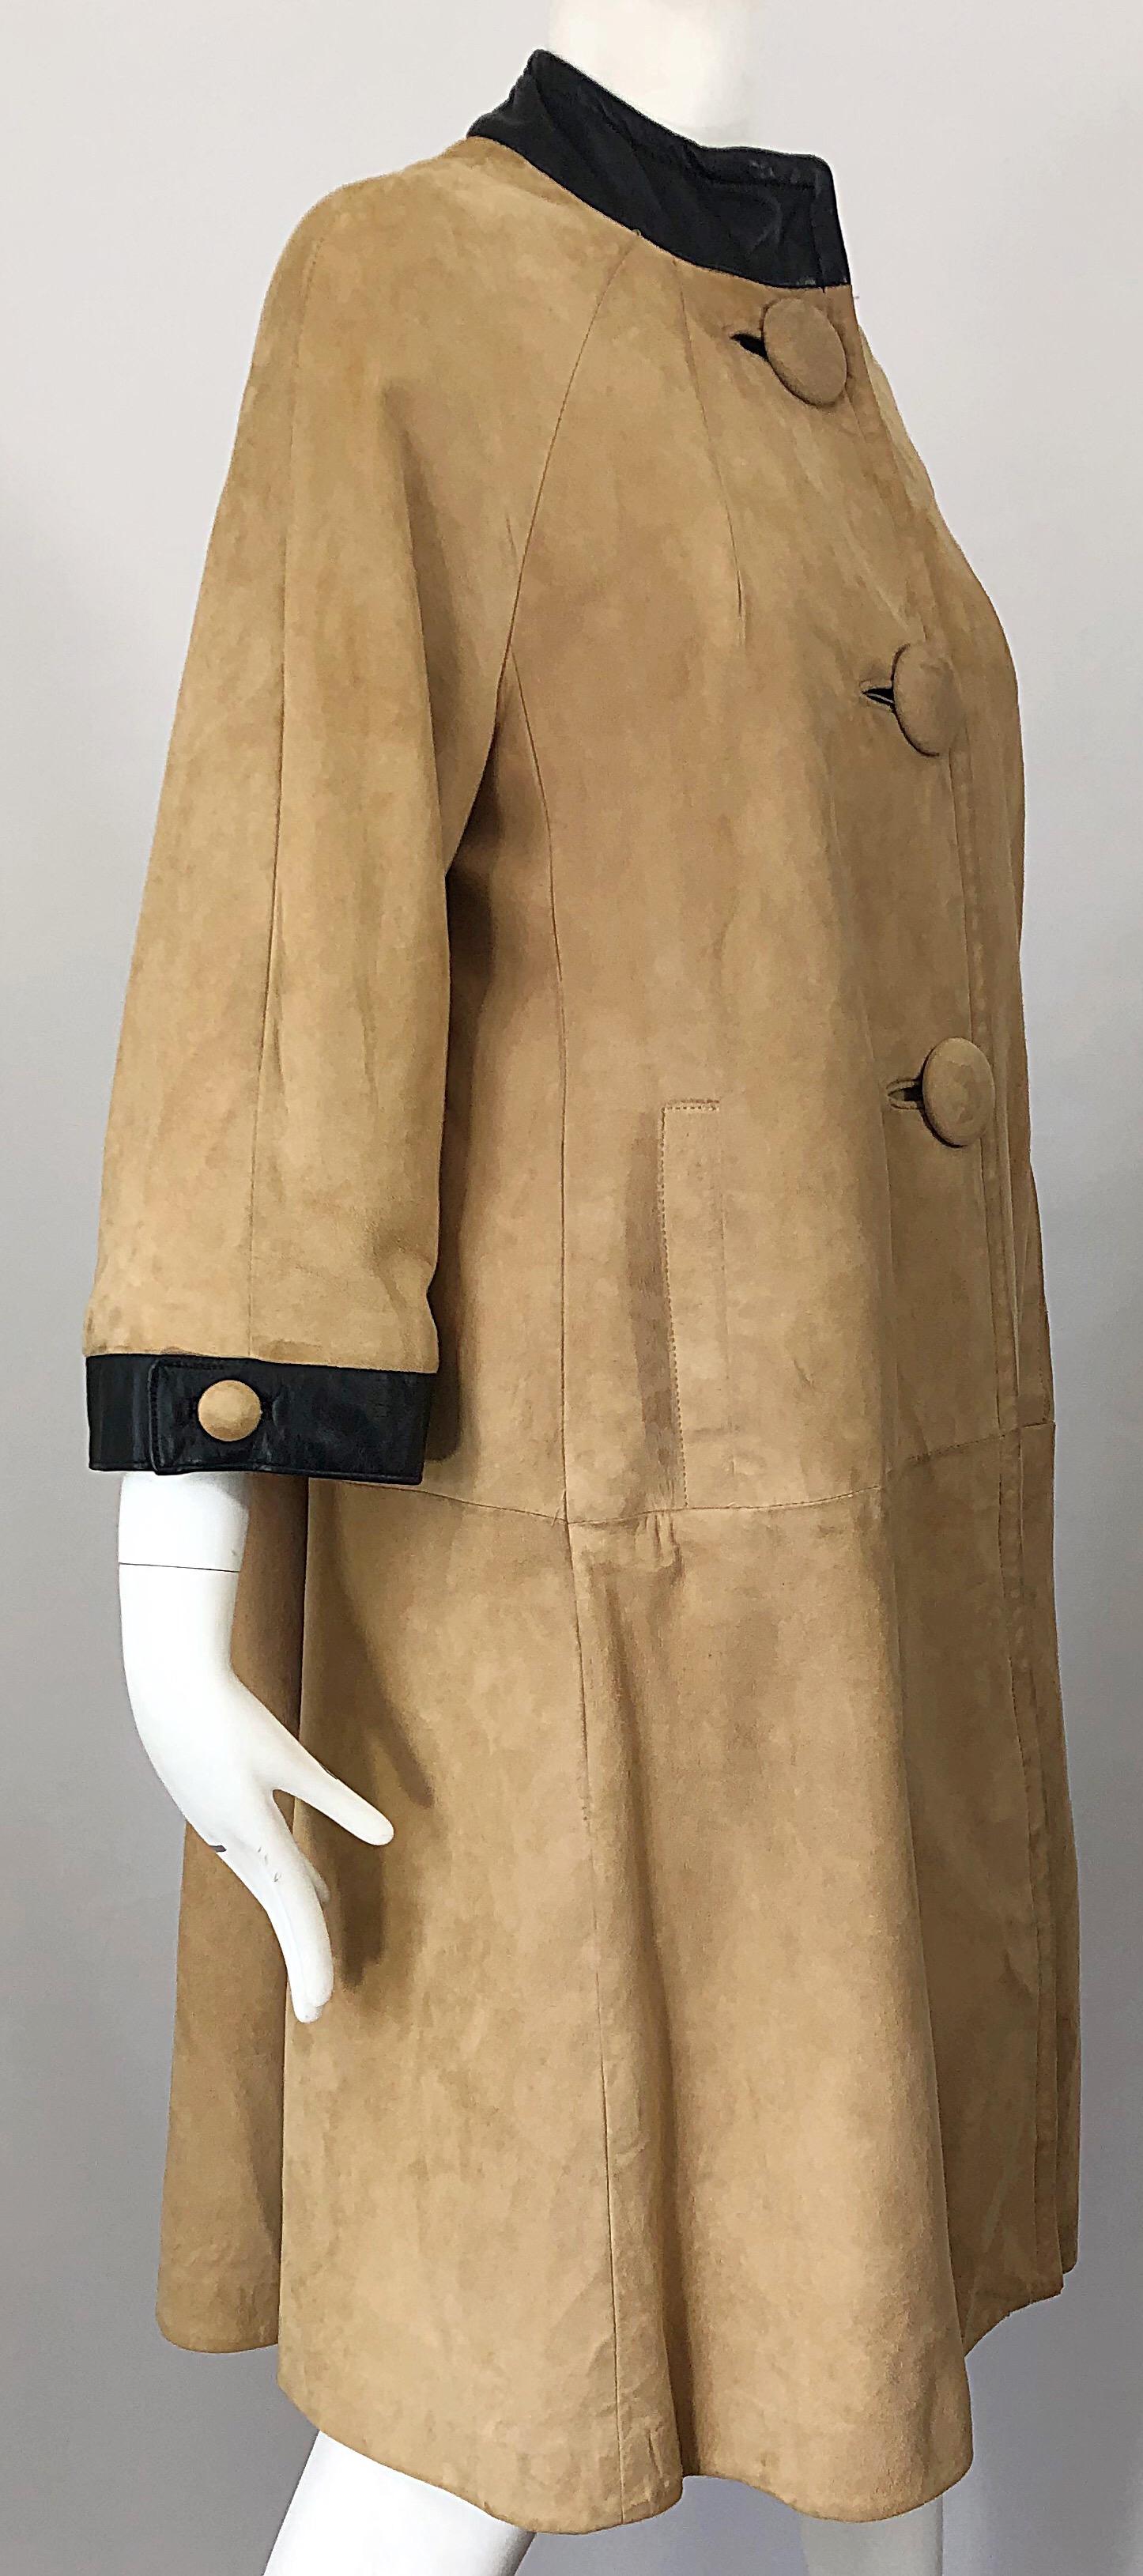 1960s Lillie Rubin Tan + Black Suede and Leather Vintage 60s Swing Jacket Coat 5